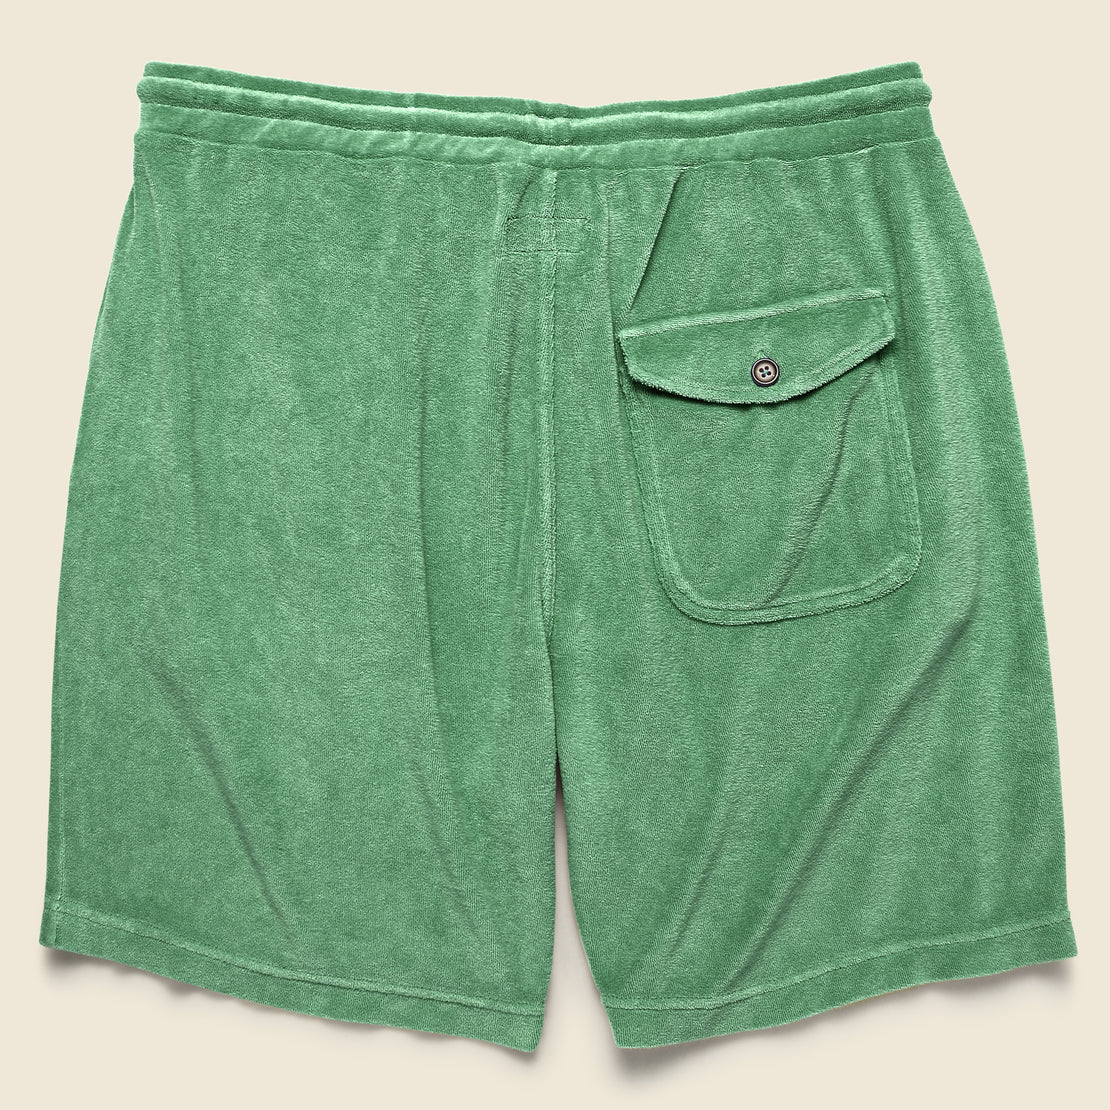 Terry Fleece Beach Short - Green - Universal Works - STAG Provisions - Shorts - Lounge